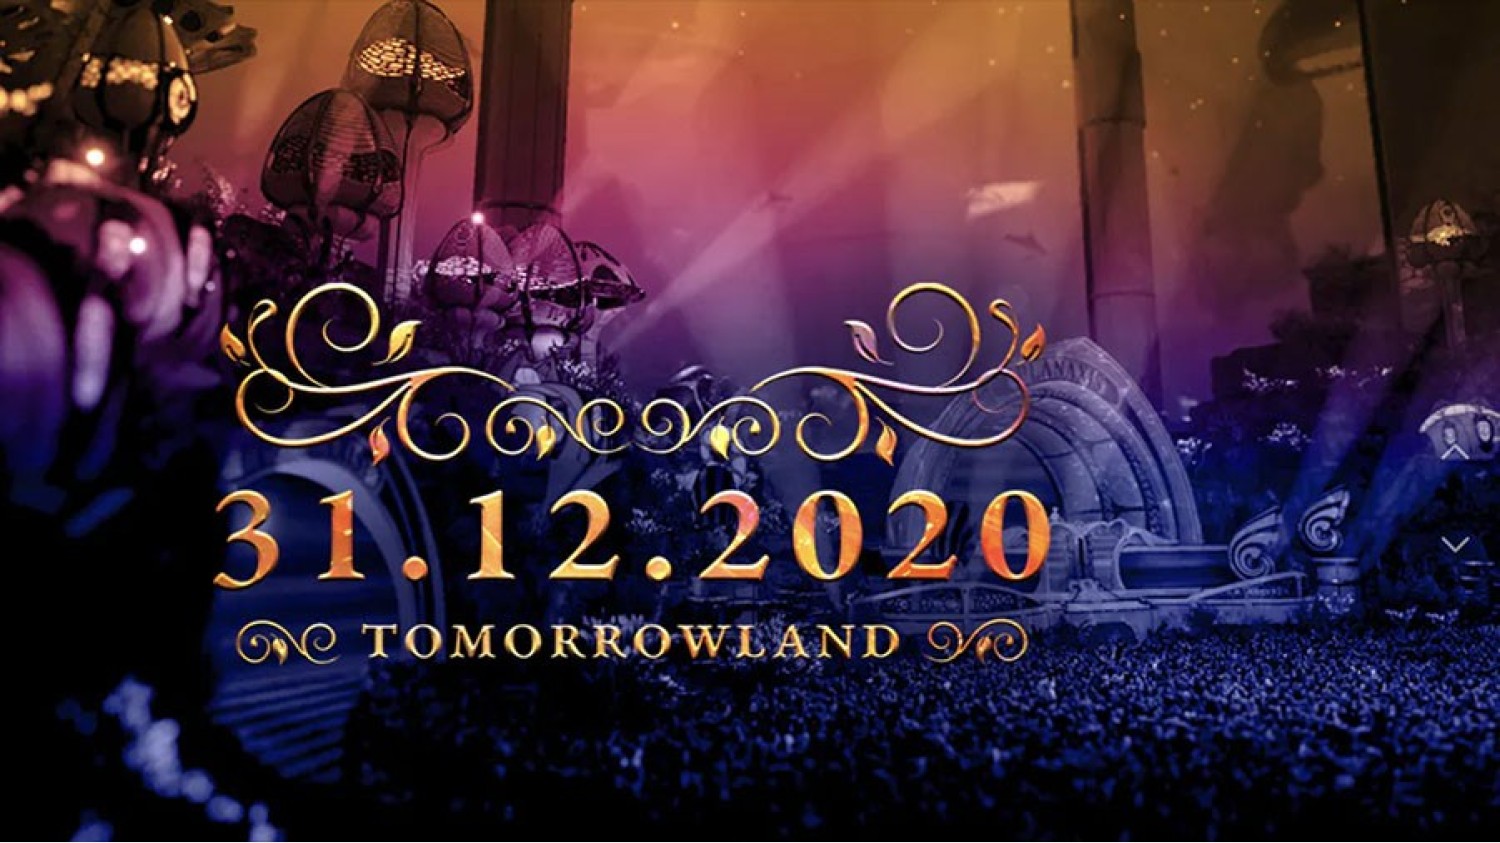 Party nieuws: Timetable voor Tomorrowland New Years Eve 31-12-2020